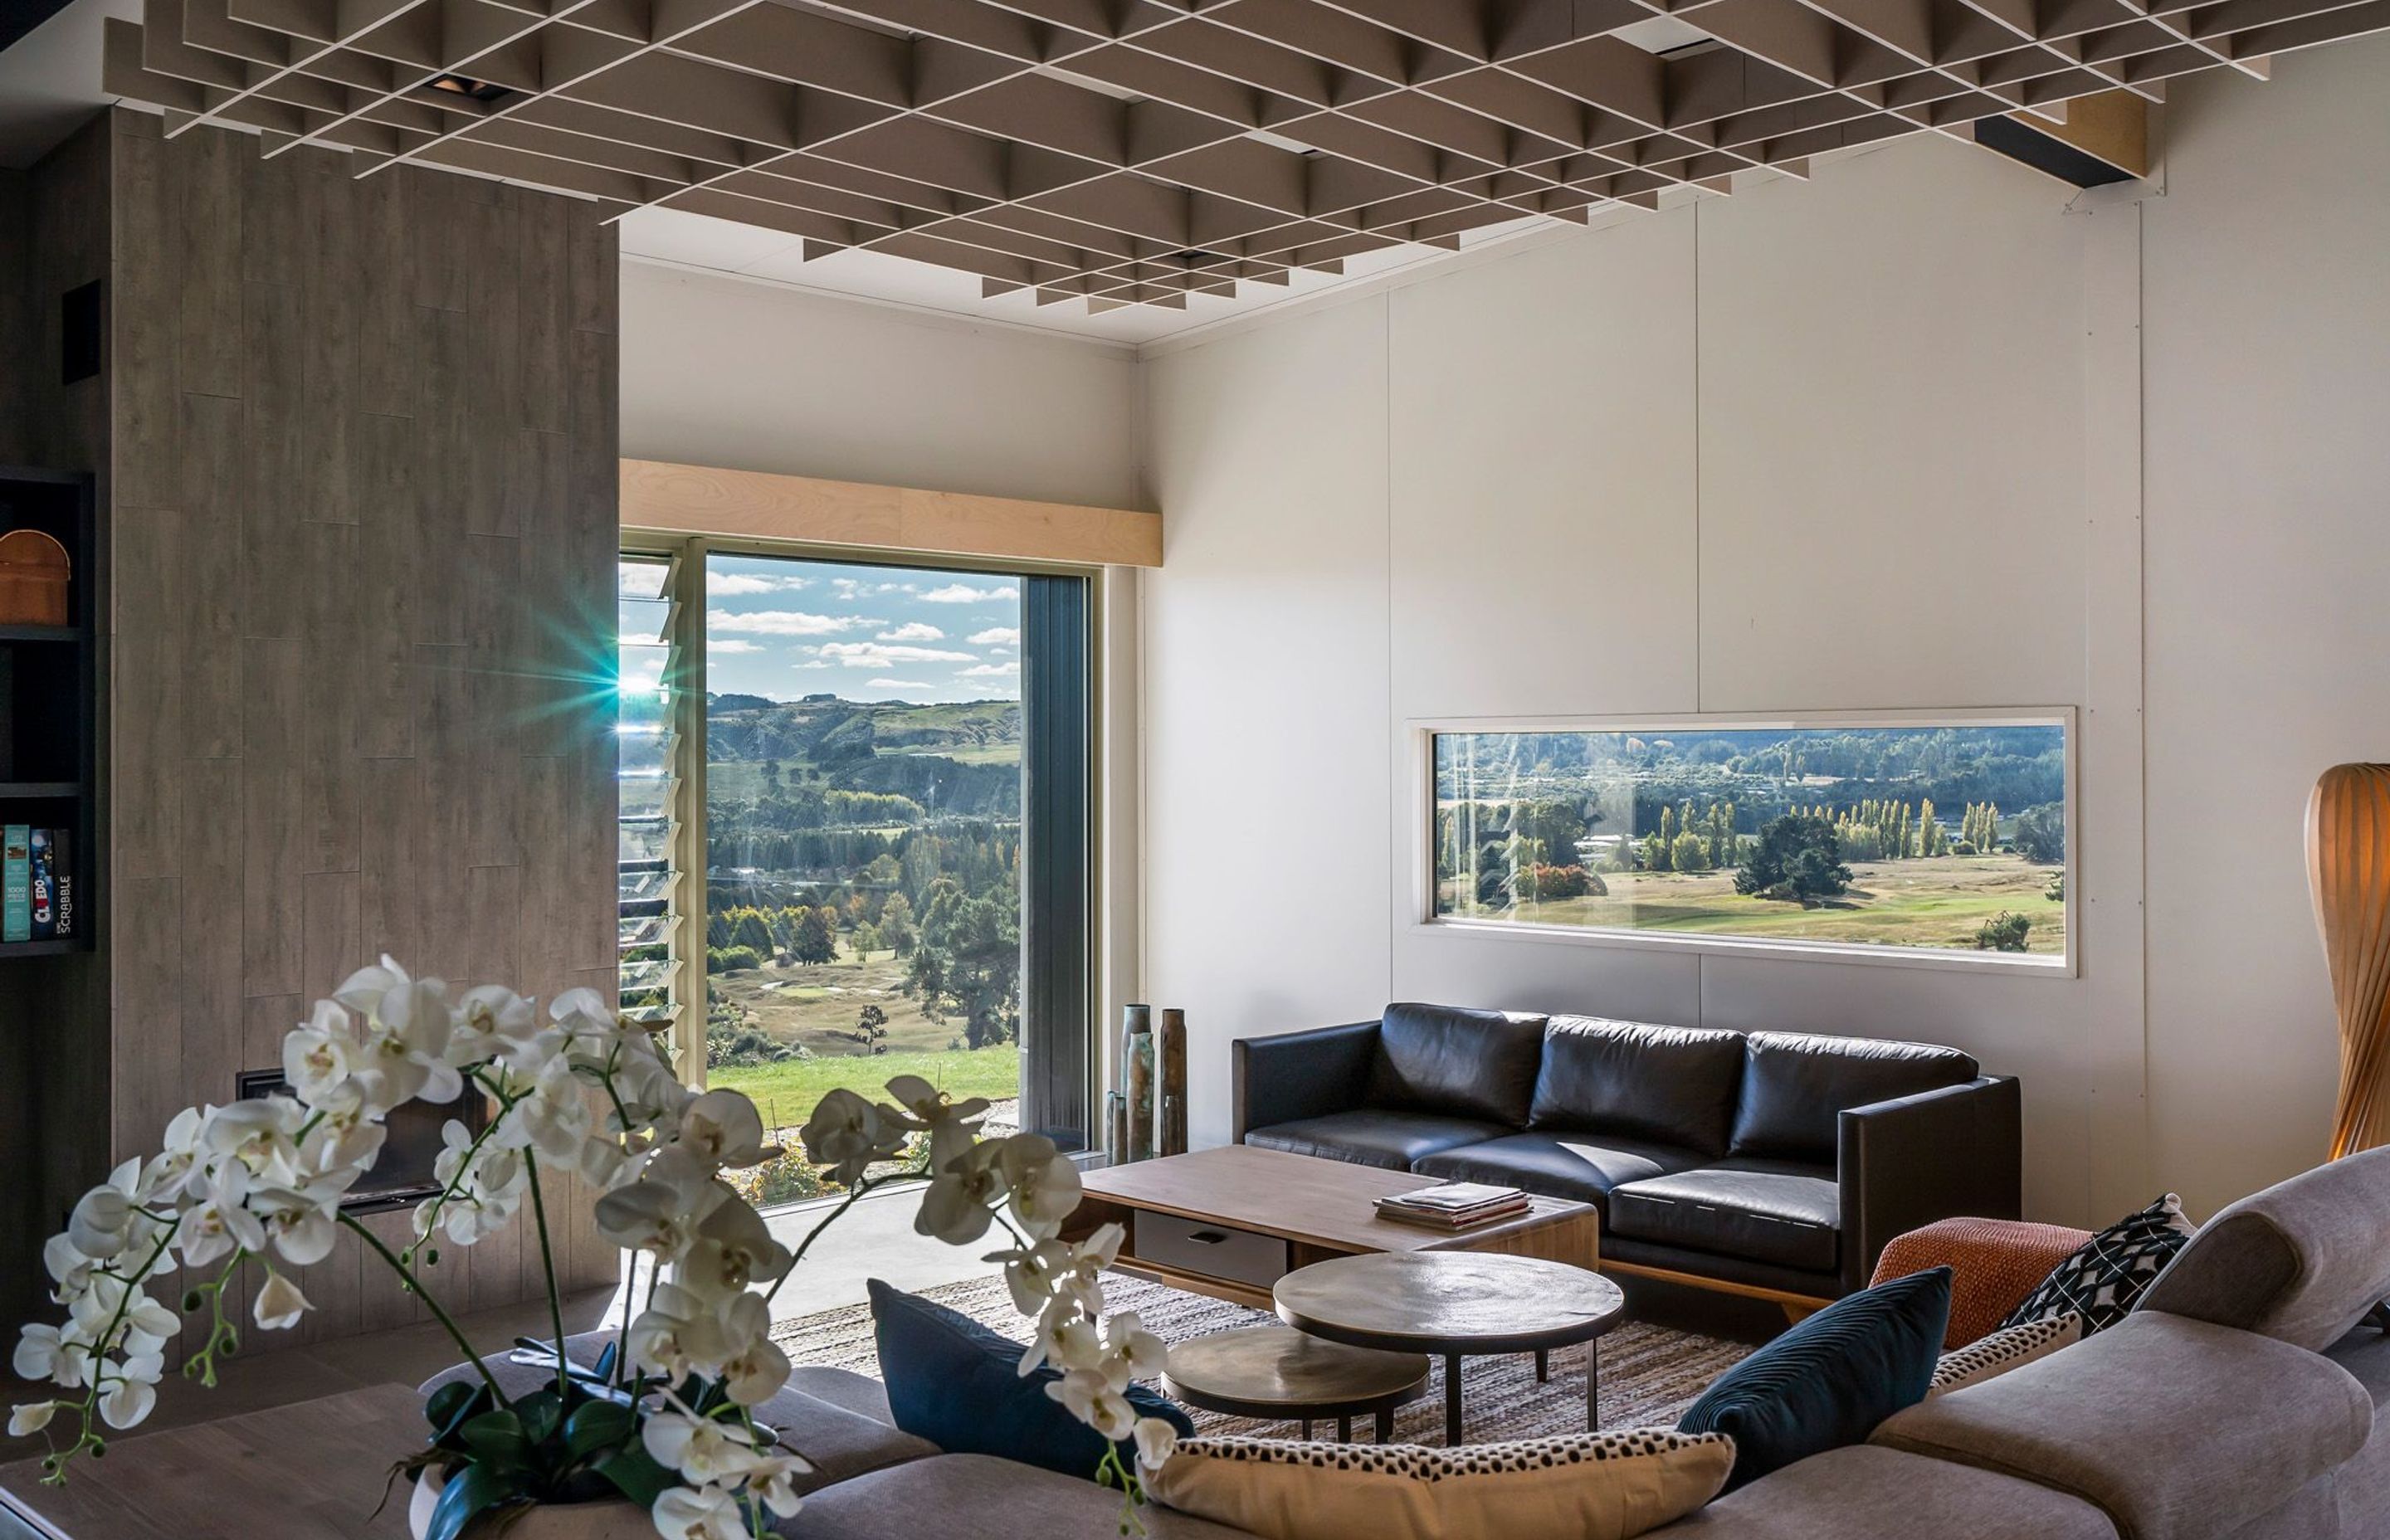 An acoustic waffle over the lounge area adds to the cosiness and intimacy of this space. Photograph: ArchiPro.